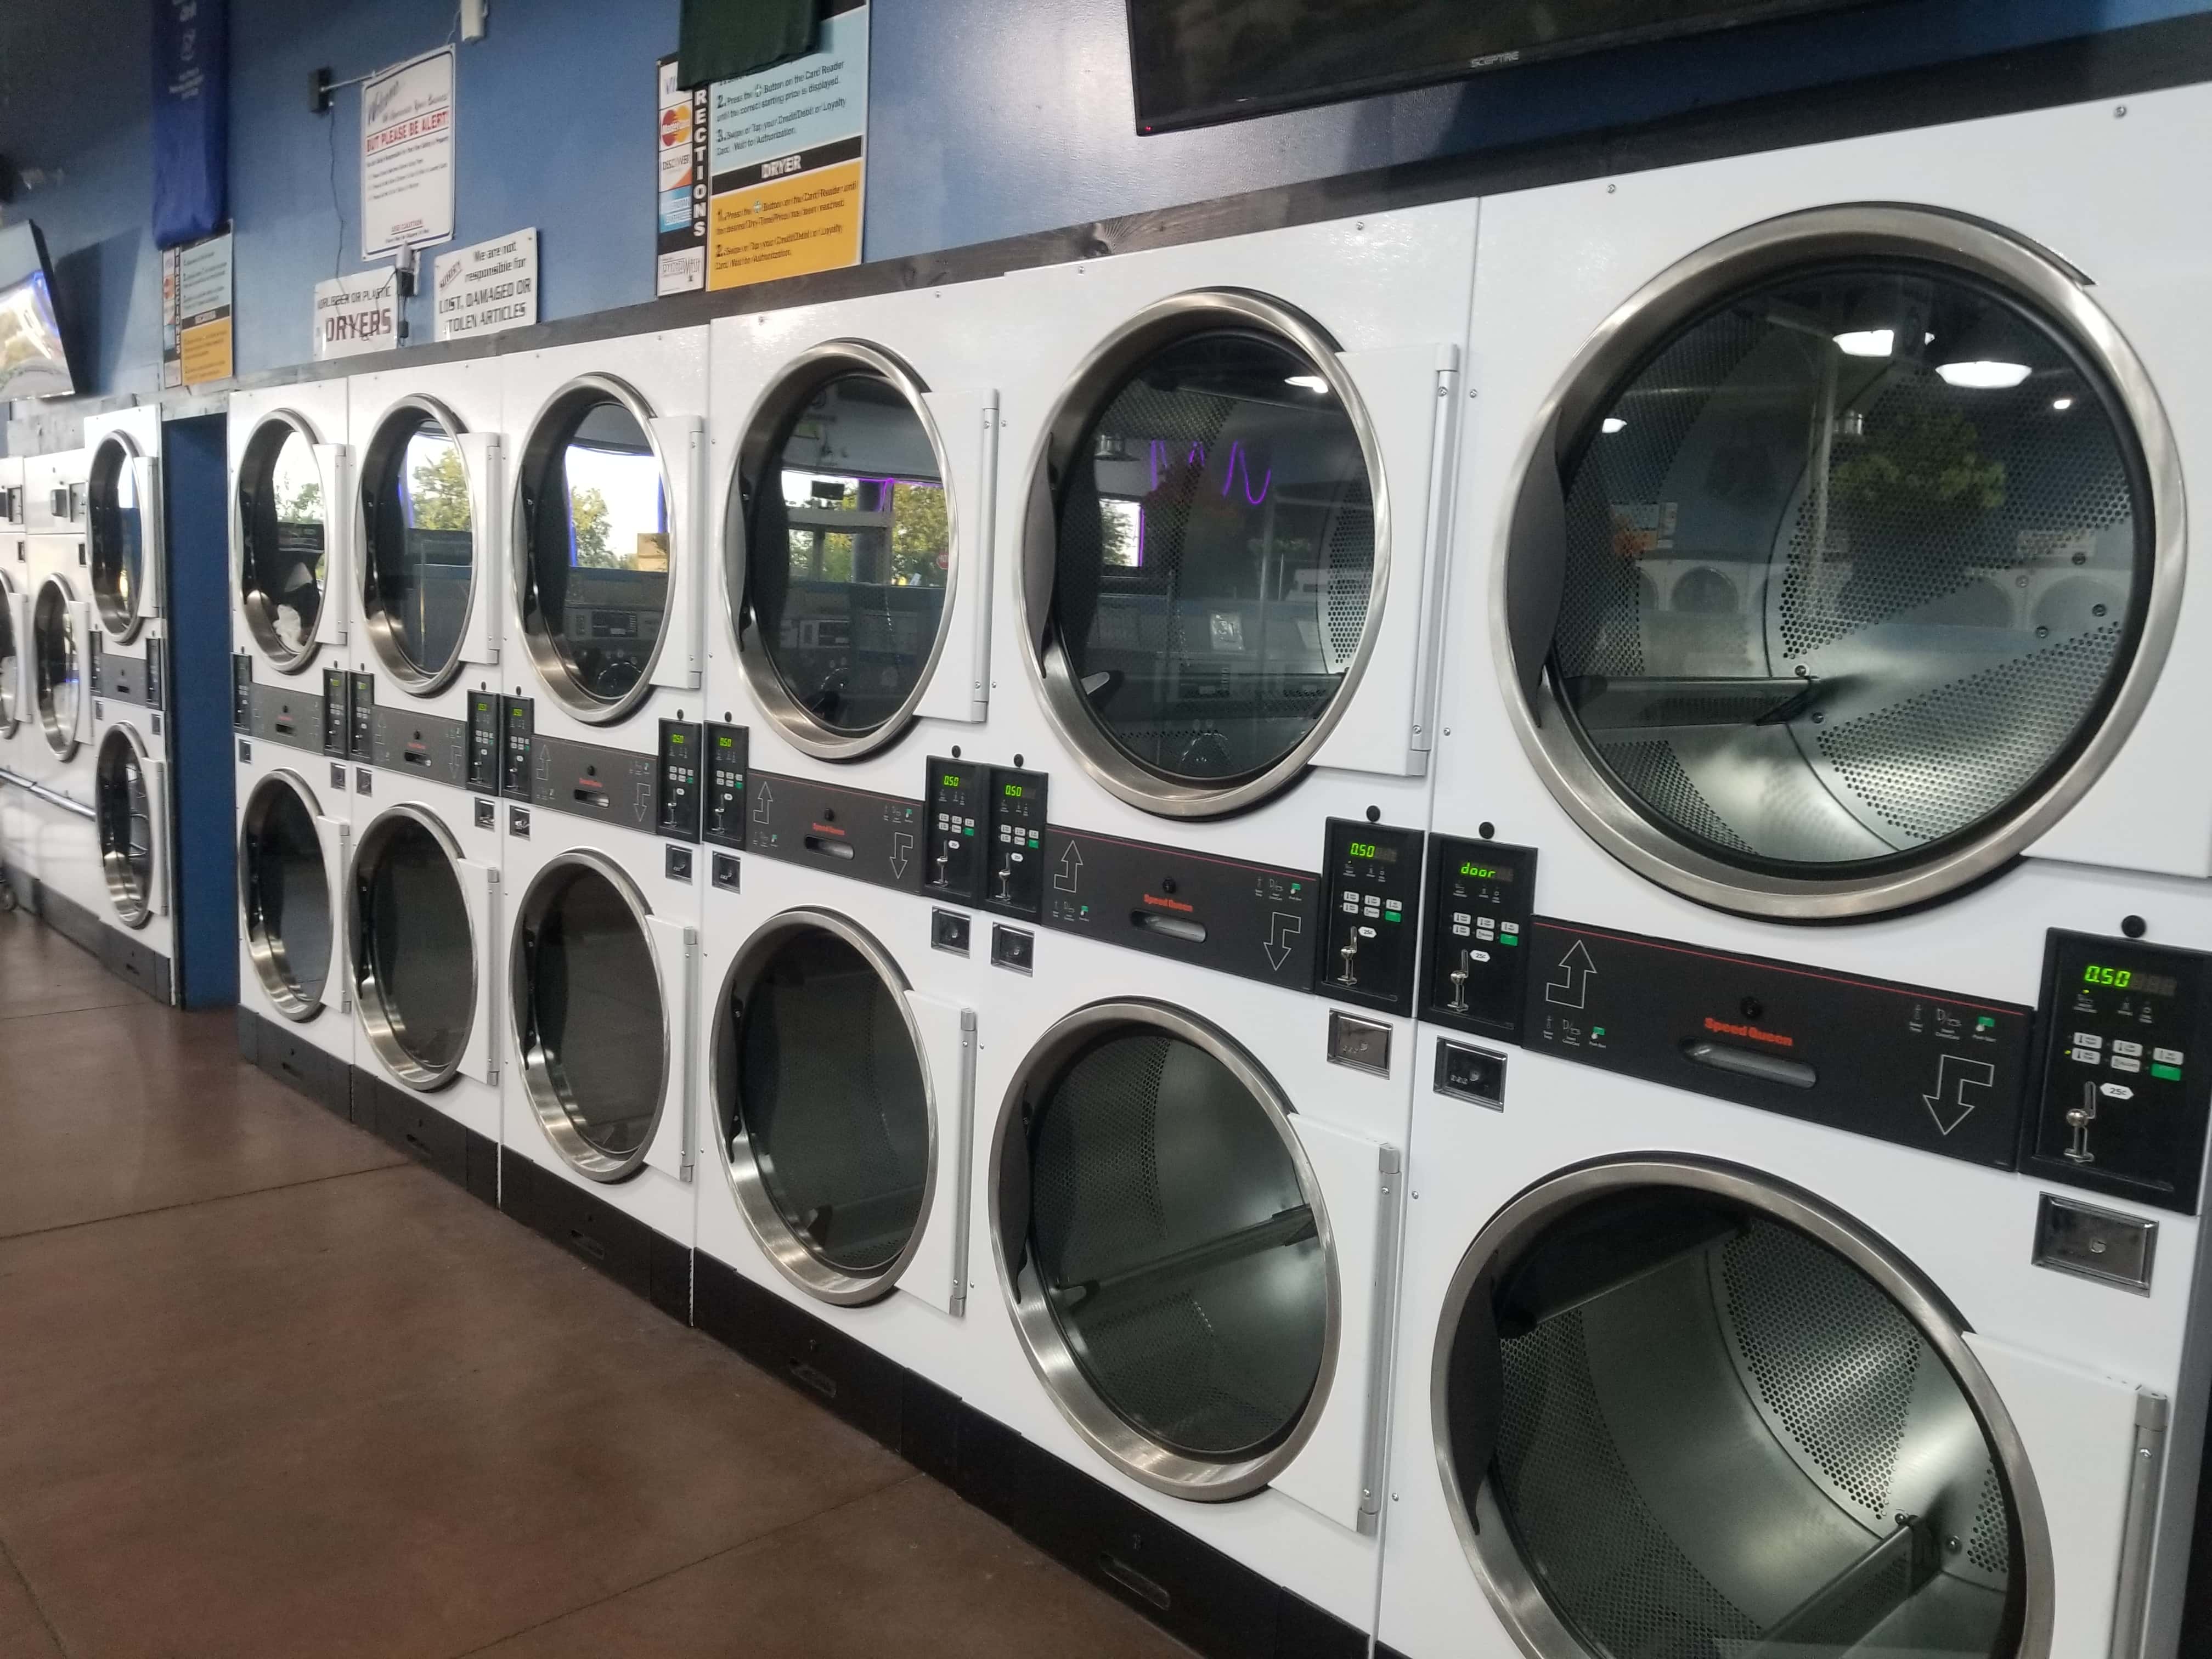 Laundry Time Circle - Colorado Springs, CO, US, closest laundromat